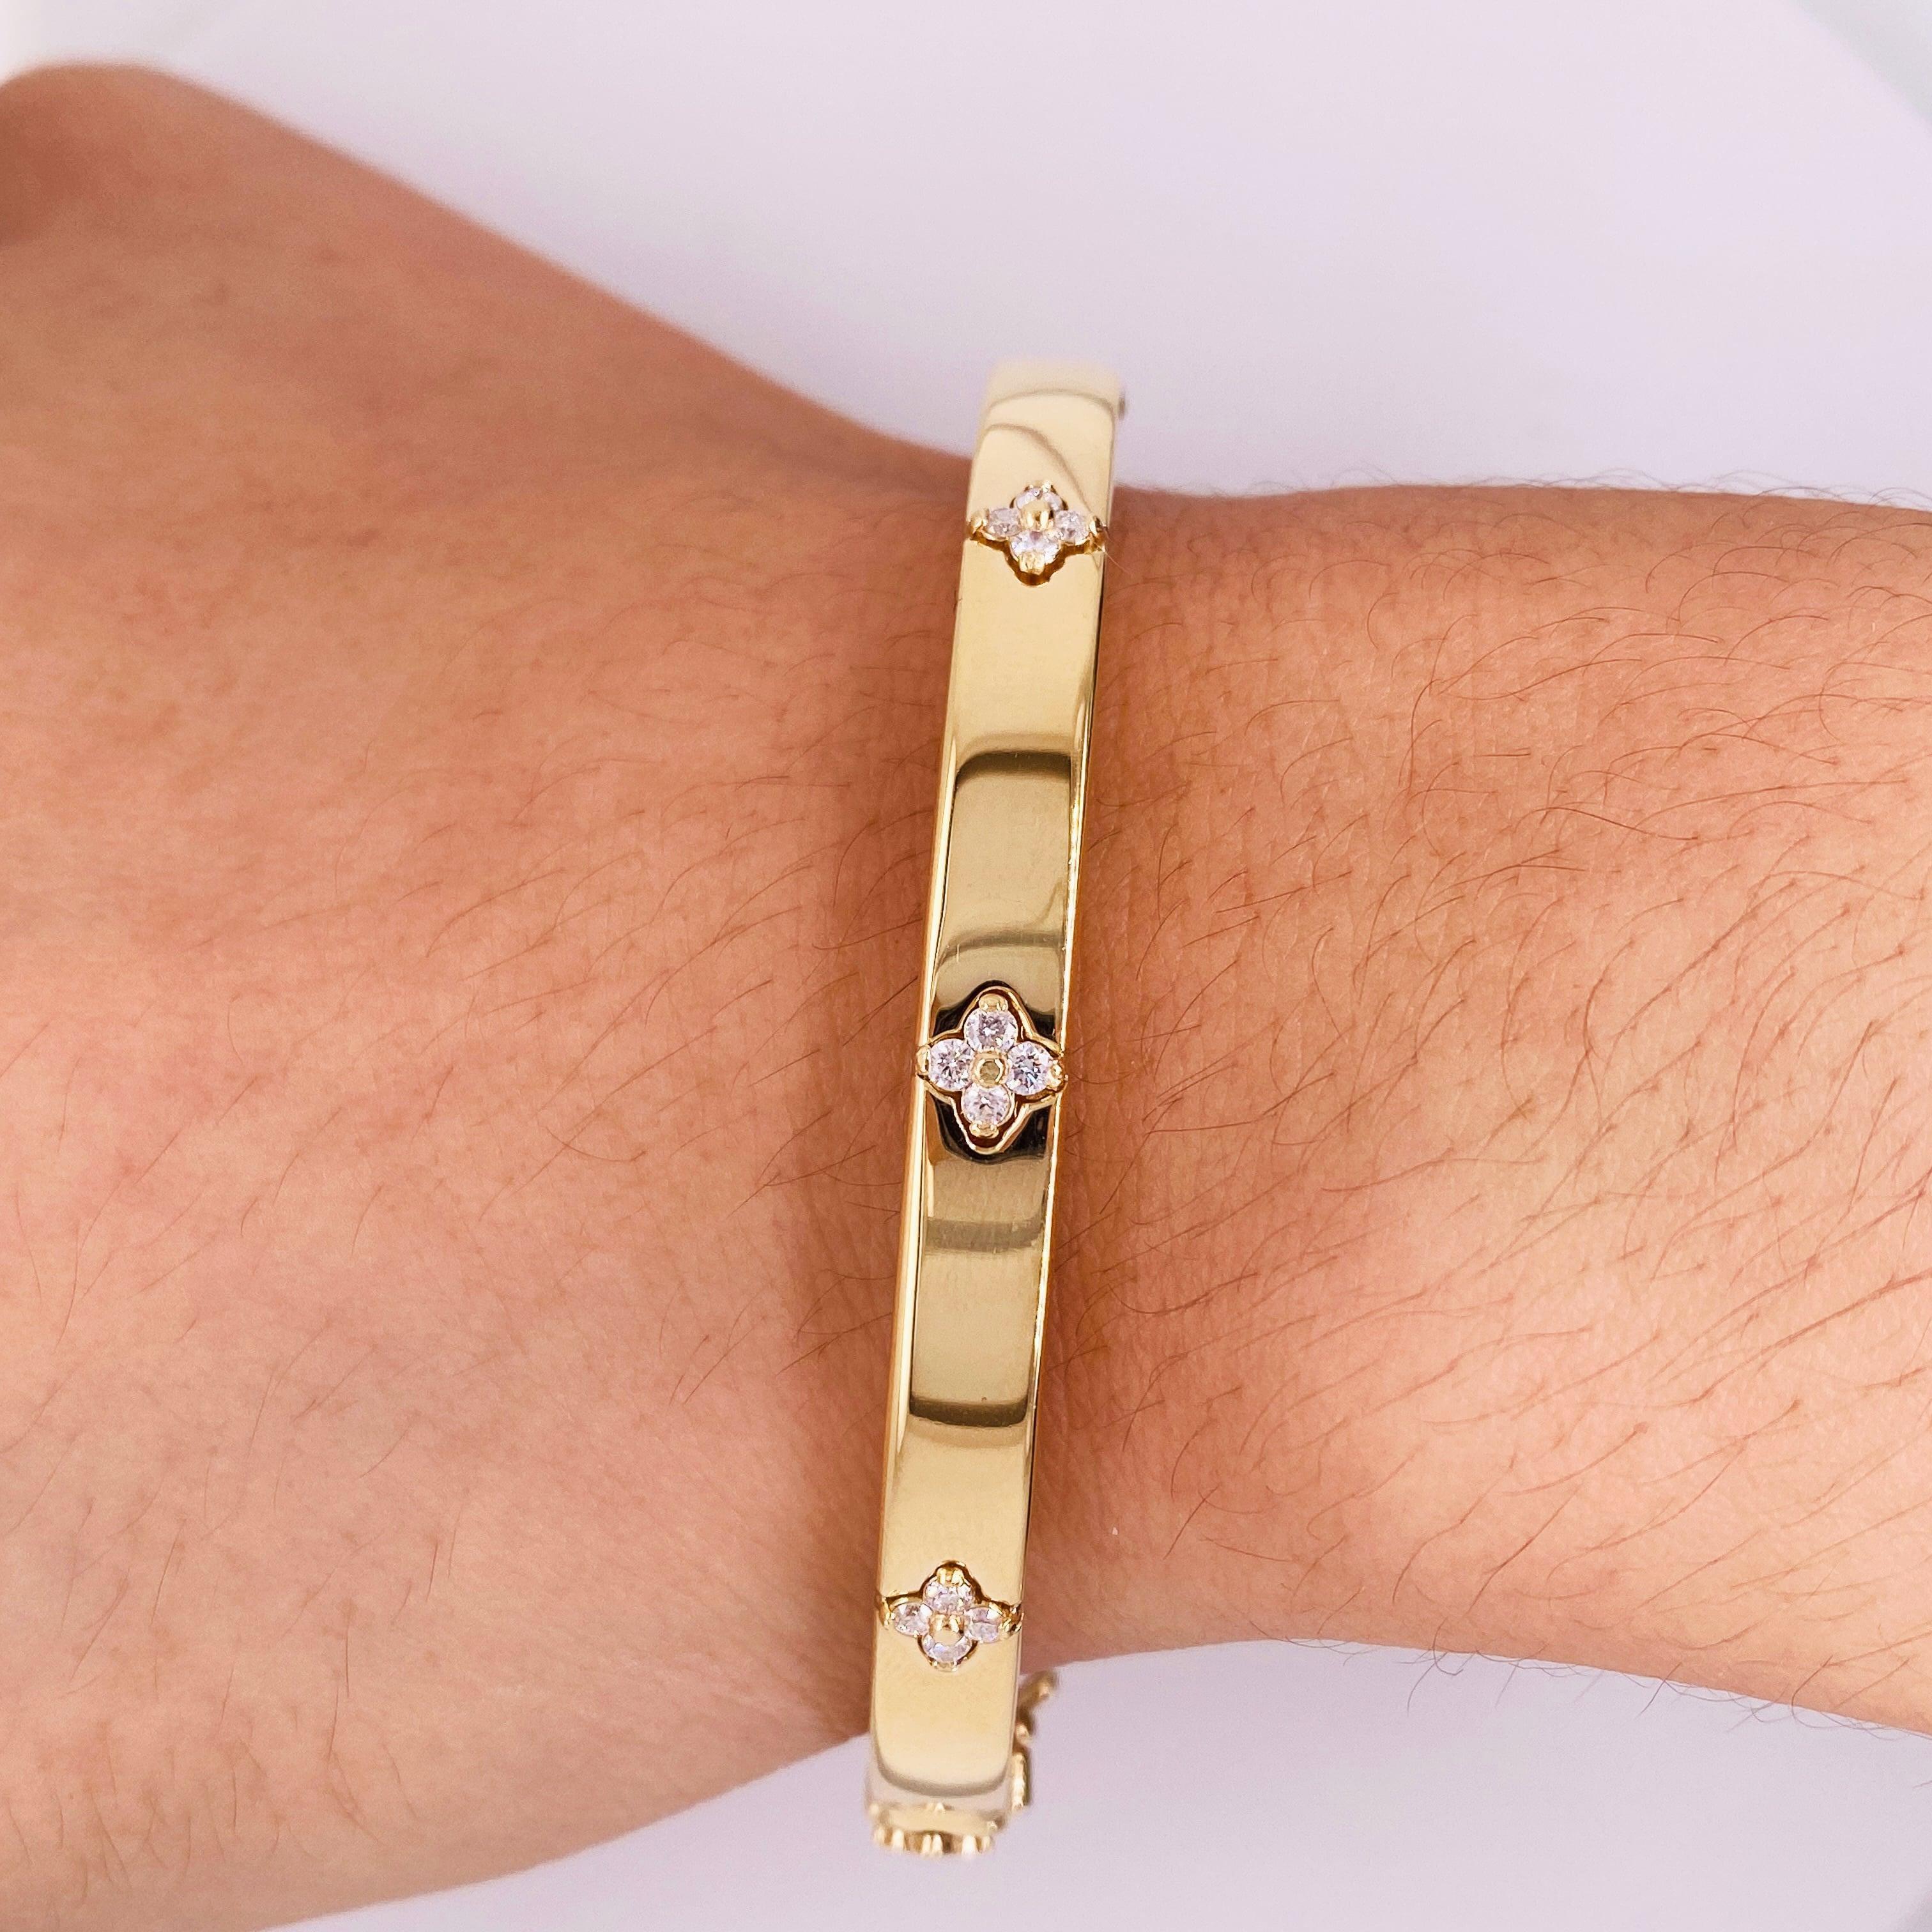 This diamond clover bracelet was made for us in Italy out of recycled 14 karat gold and finished beautifully to the high standards Italian jewelry is known for! Each of the 3 diamond clovers set across the top of the bangle is made with four